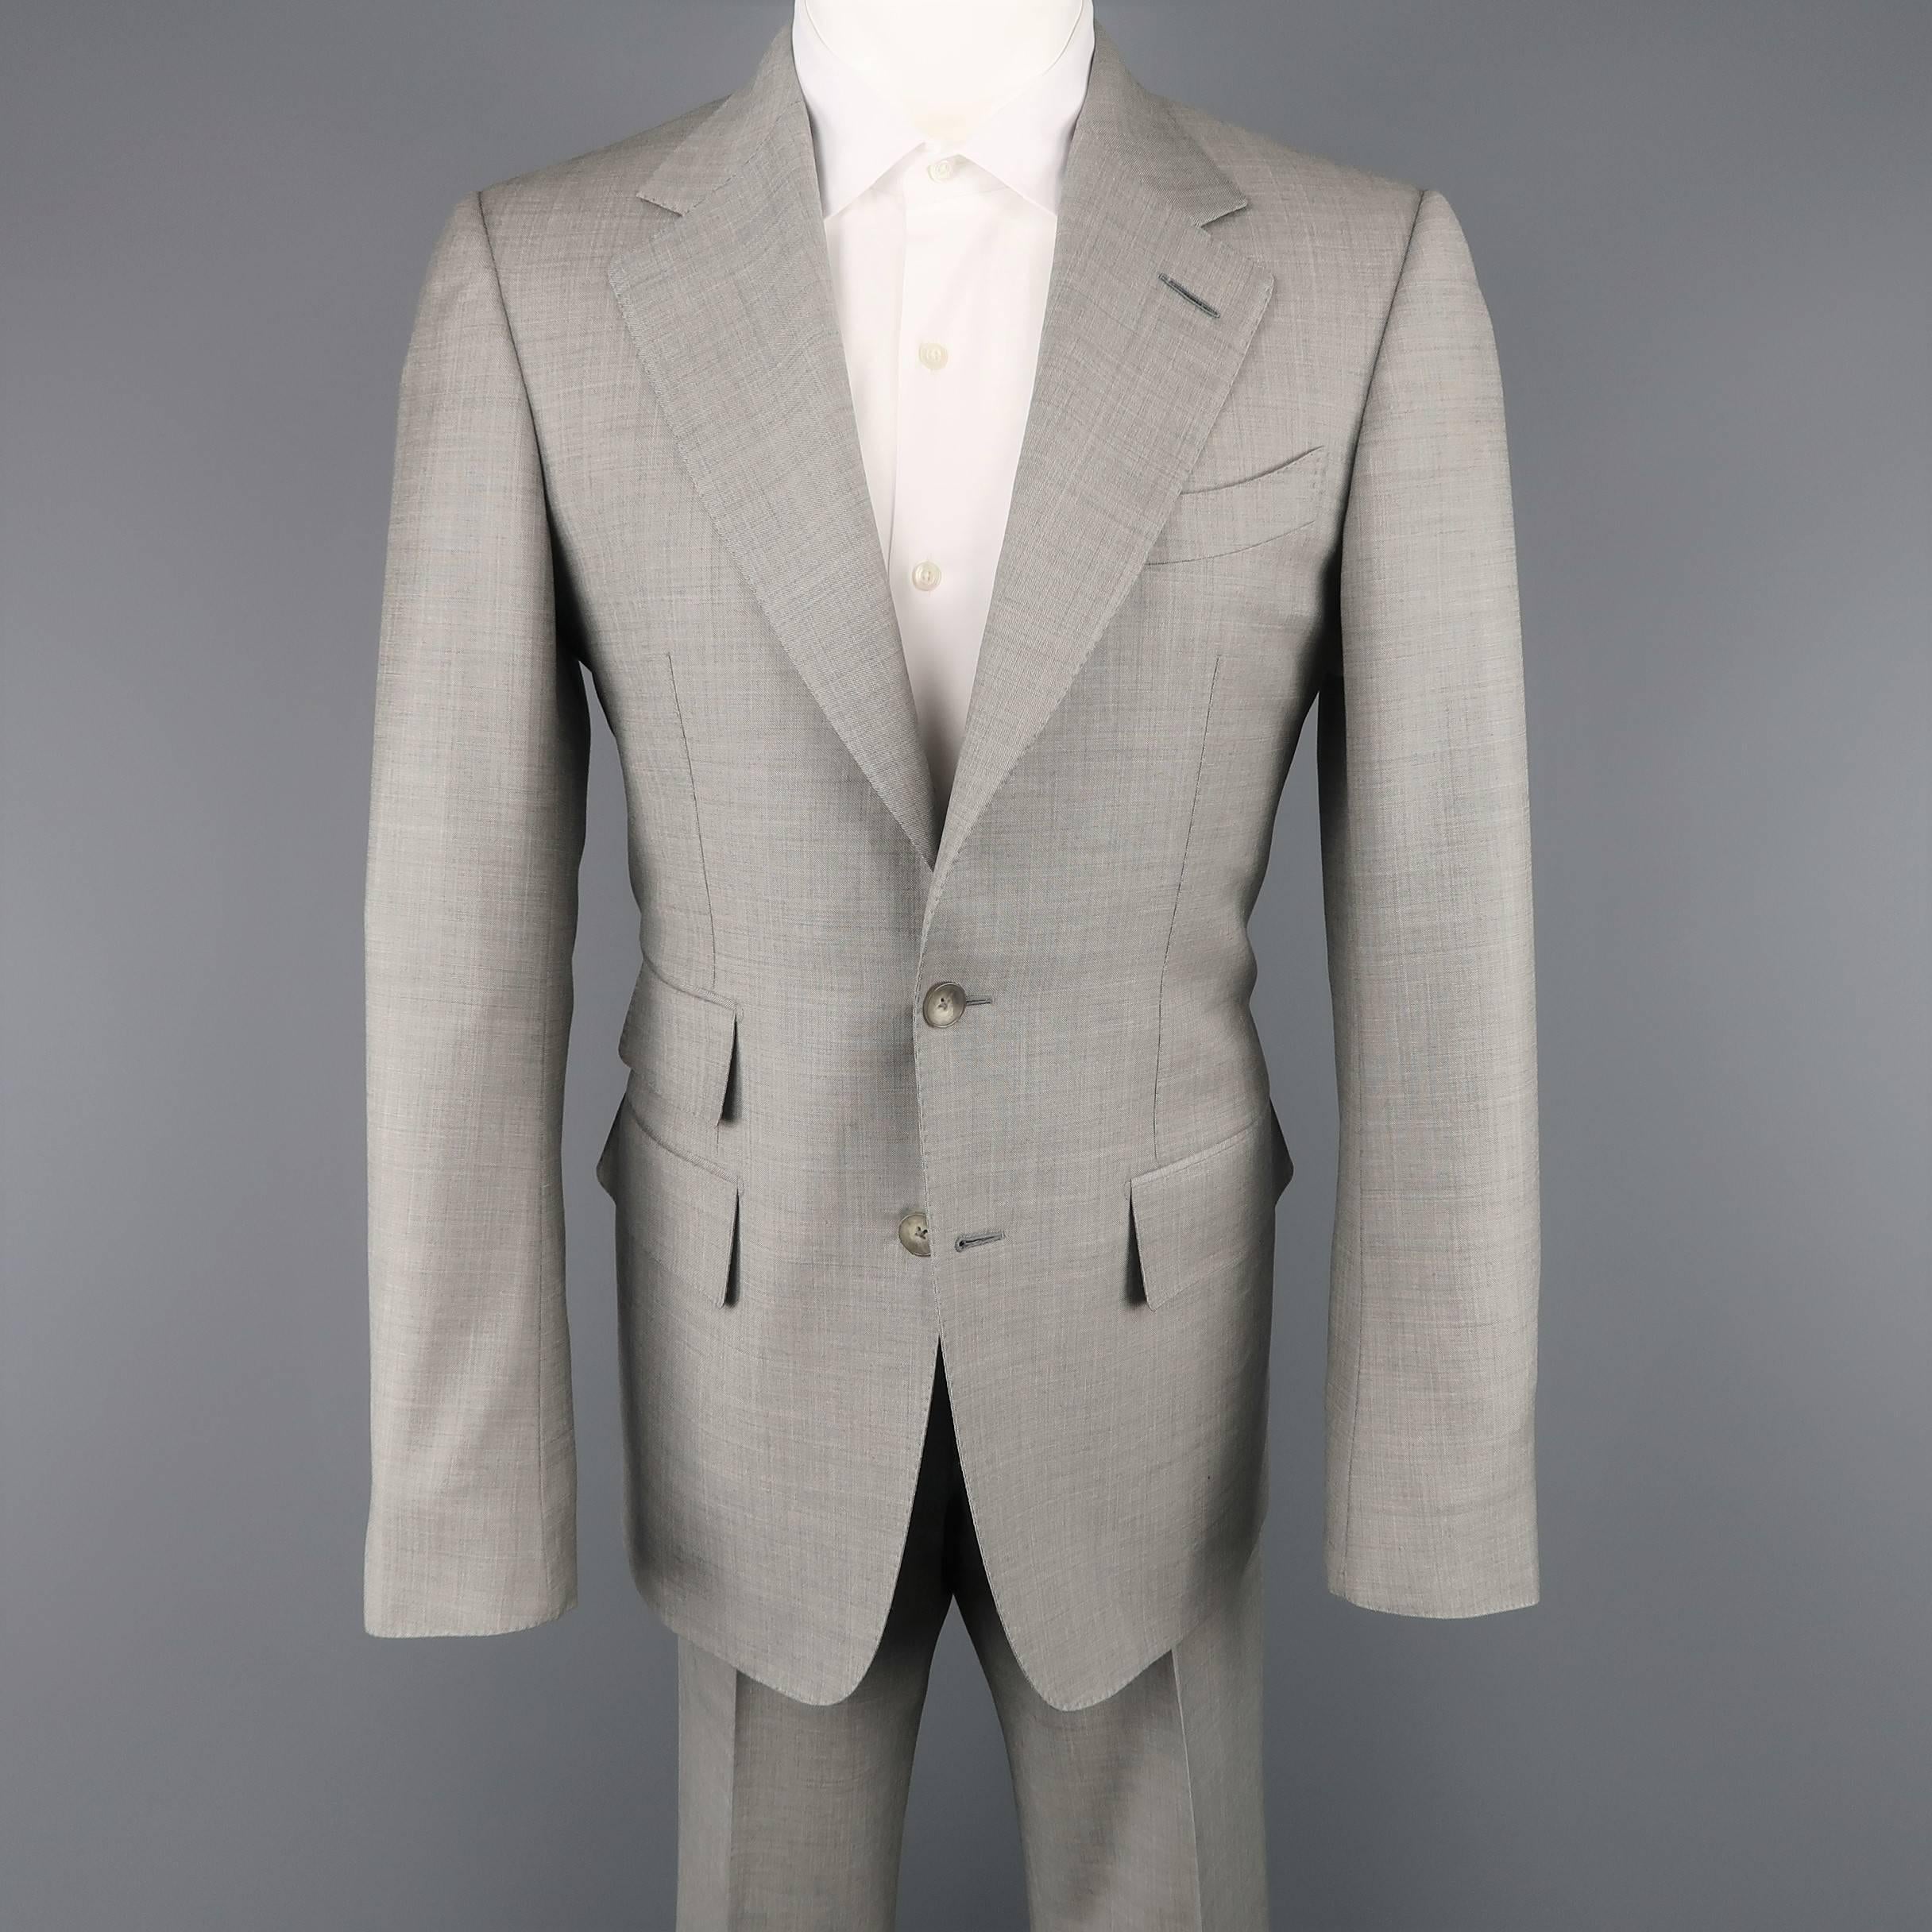 Custom Made Tom Ford suit comes in a light gray textured cool and includes a two button, single breasted sport coat with notch lapel, triple flap pocket, and functional button cuffs with matching flat front dress pants. Spot on jacket. As-is. Made